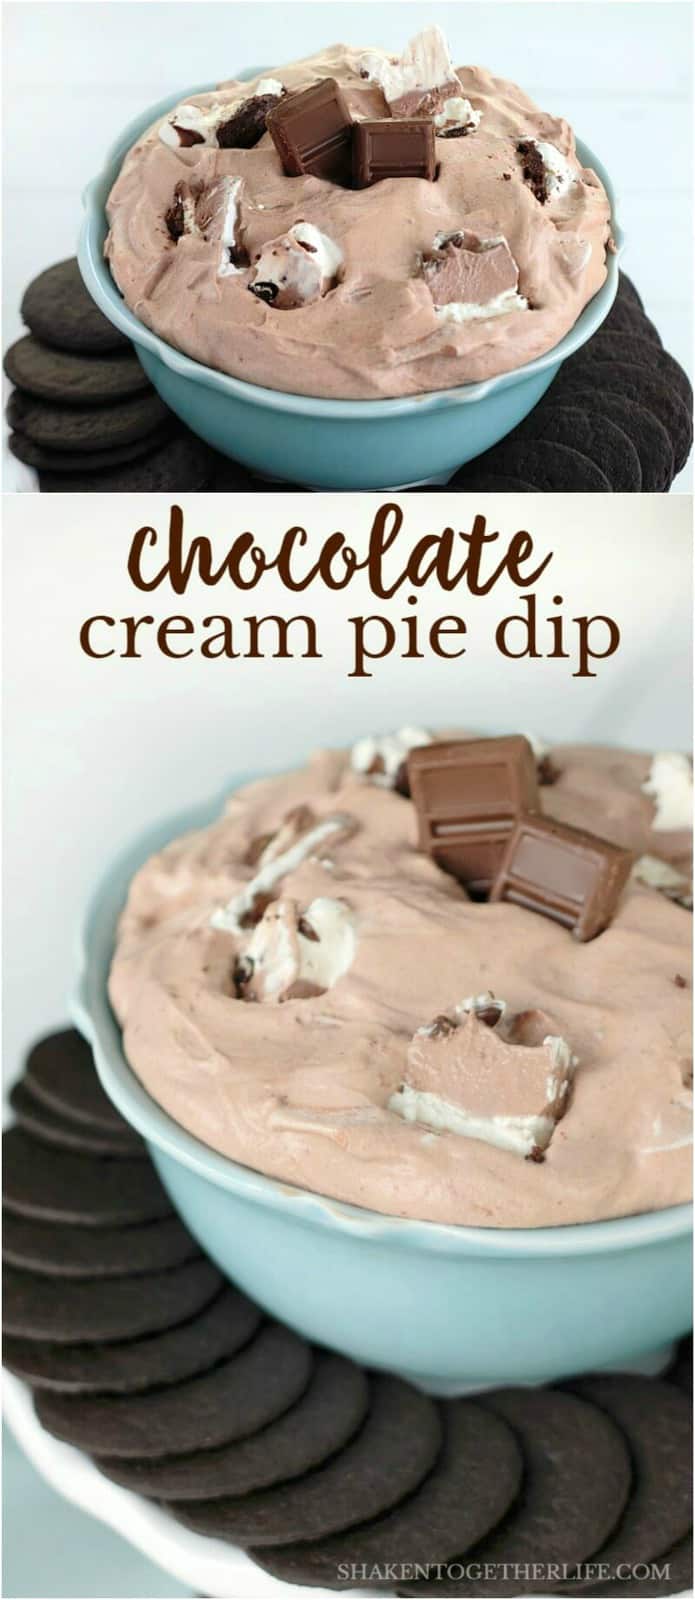 Chocolate Cream Pie Dip is a decadent no bake chocolate dessert dip with just a handful of ingredients and BIG chocolate flavor!